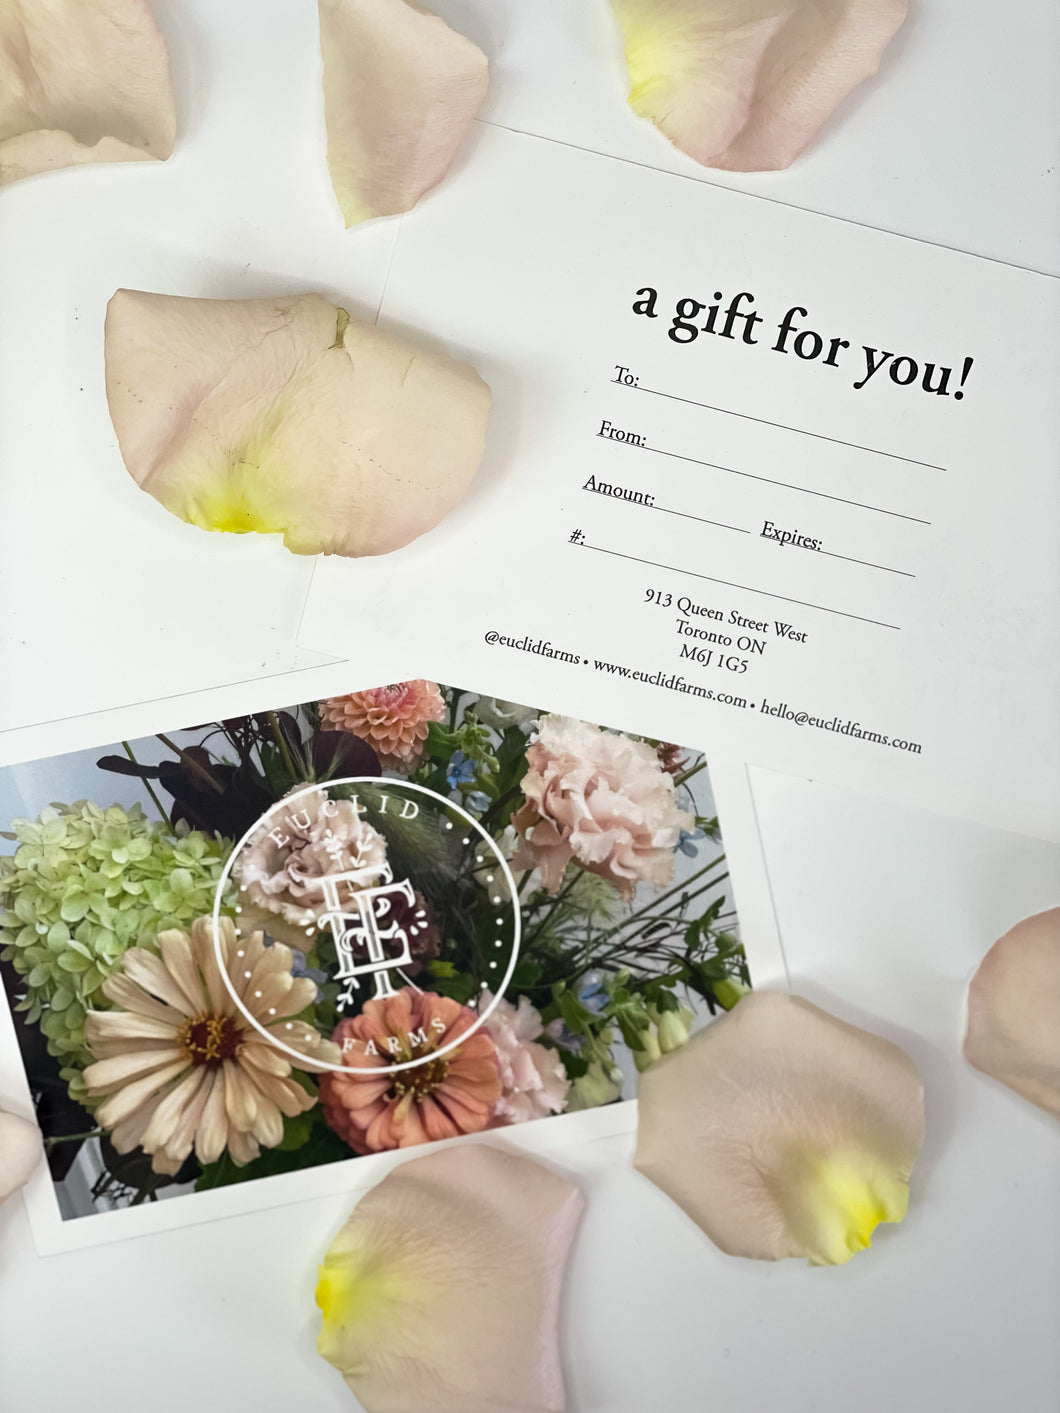 Euclid Farms Online Gift Card